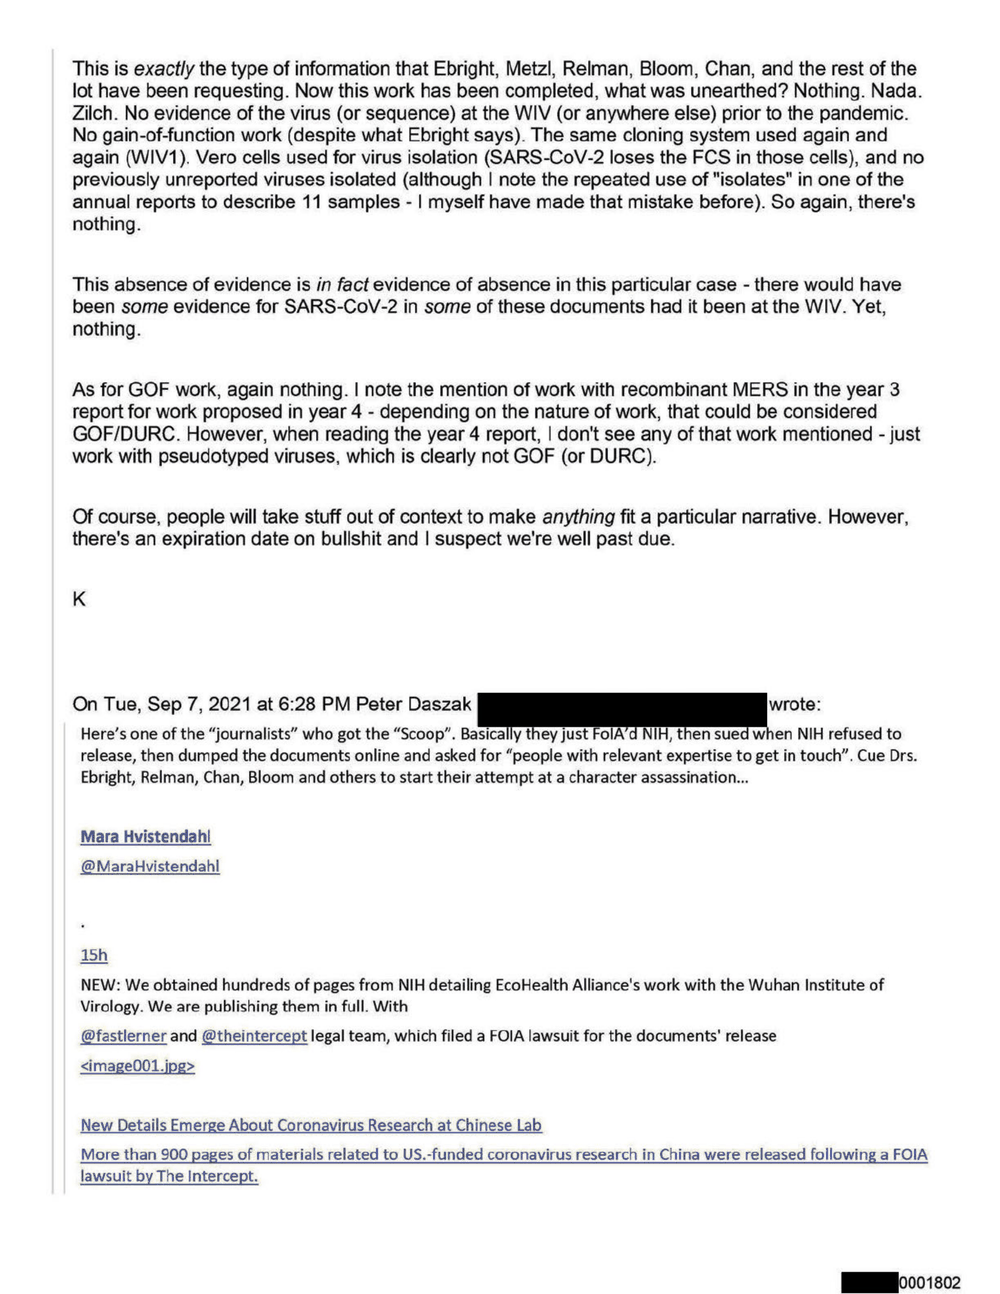 Page 29 from David Morens NIH Emails Redacted